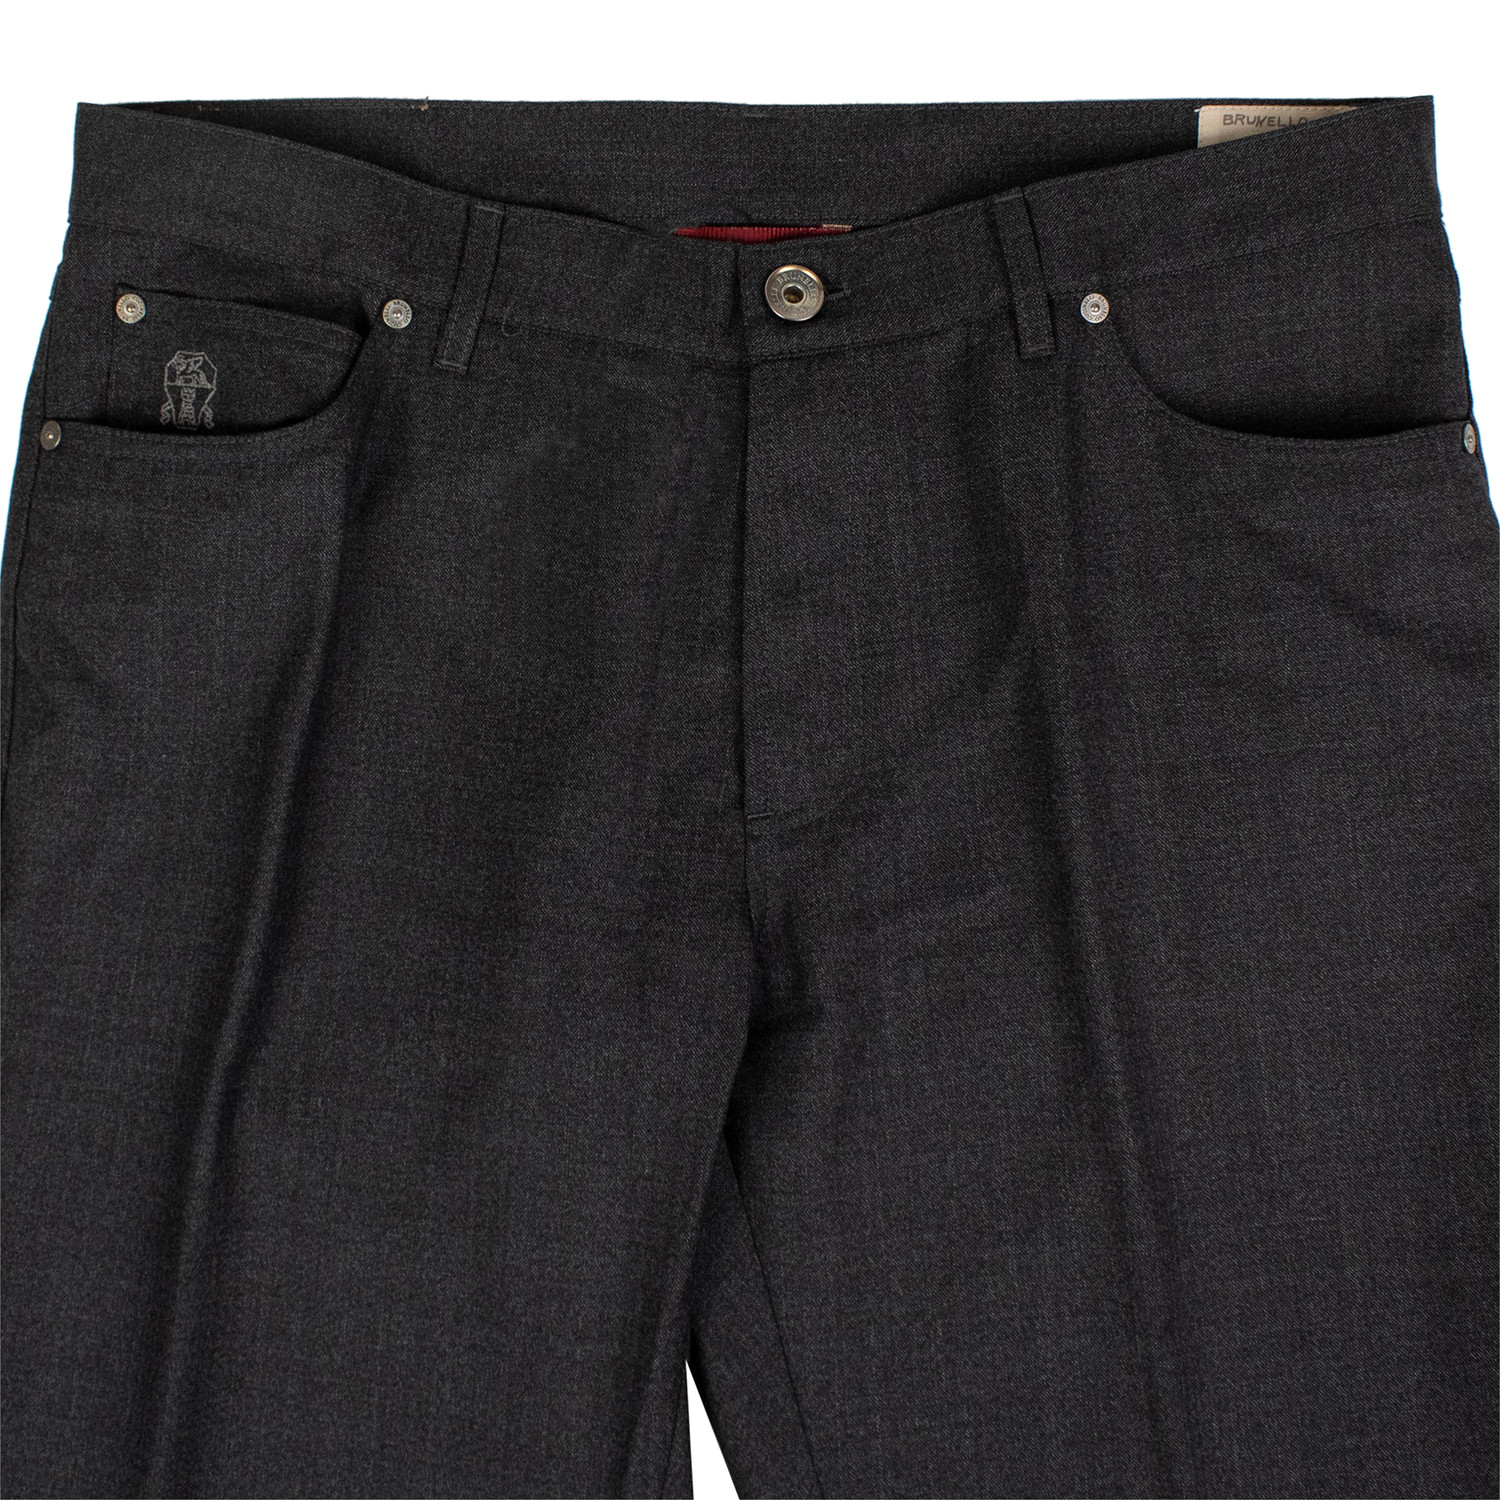 Brunello Cucinelli // Wool Five Pocket Jeans // Stone Gray (44) - The ...